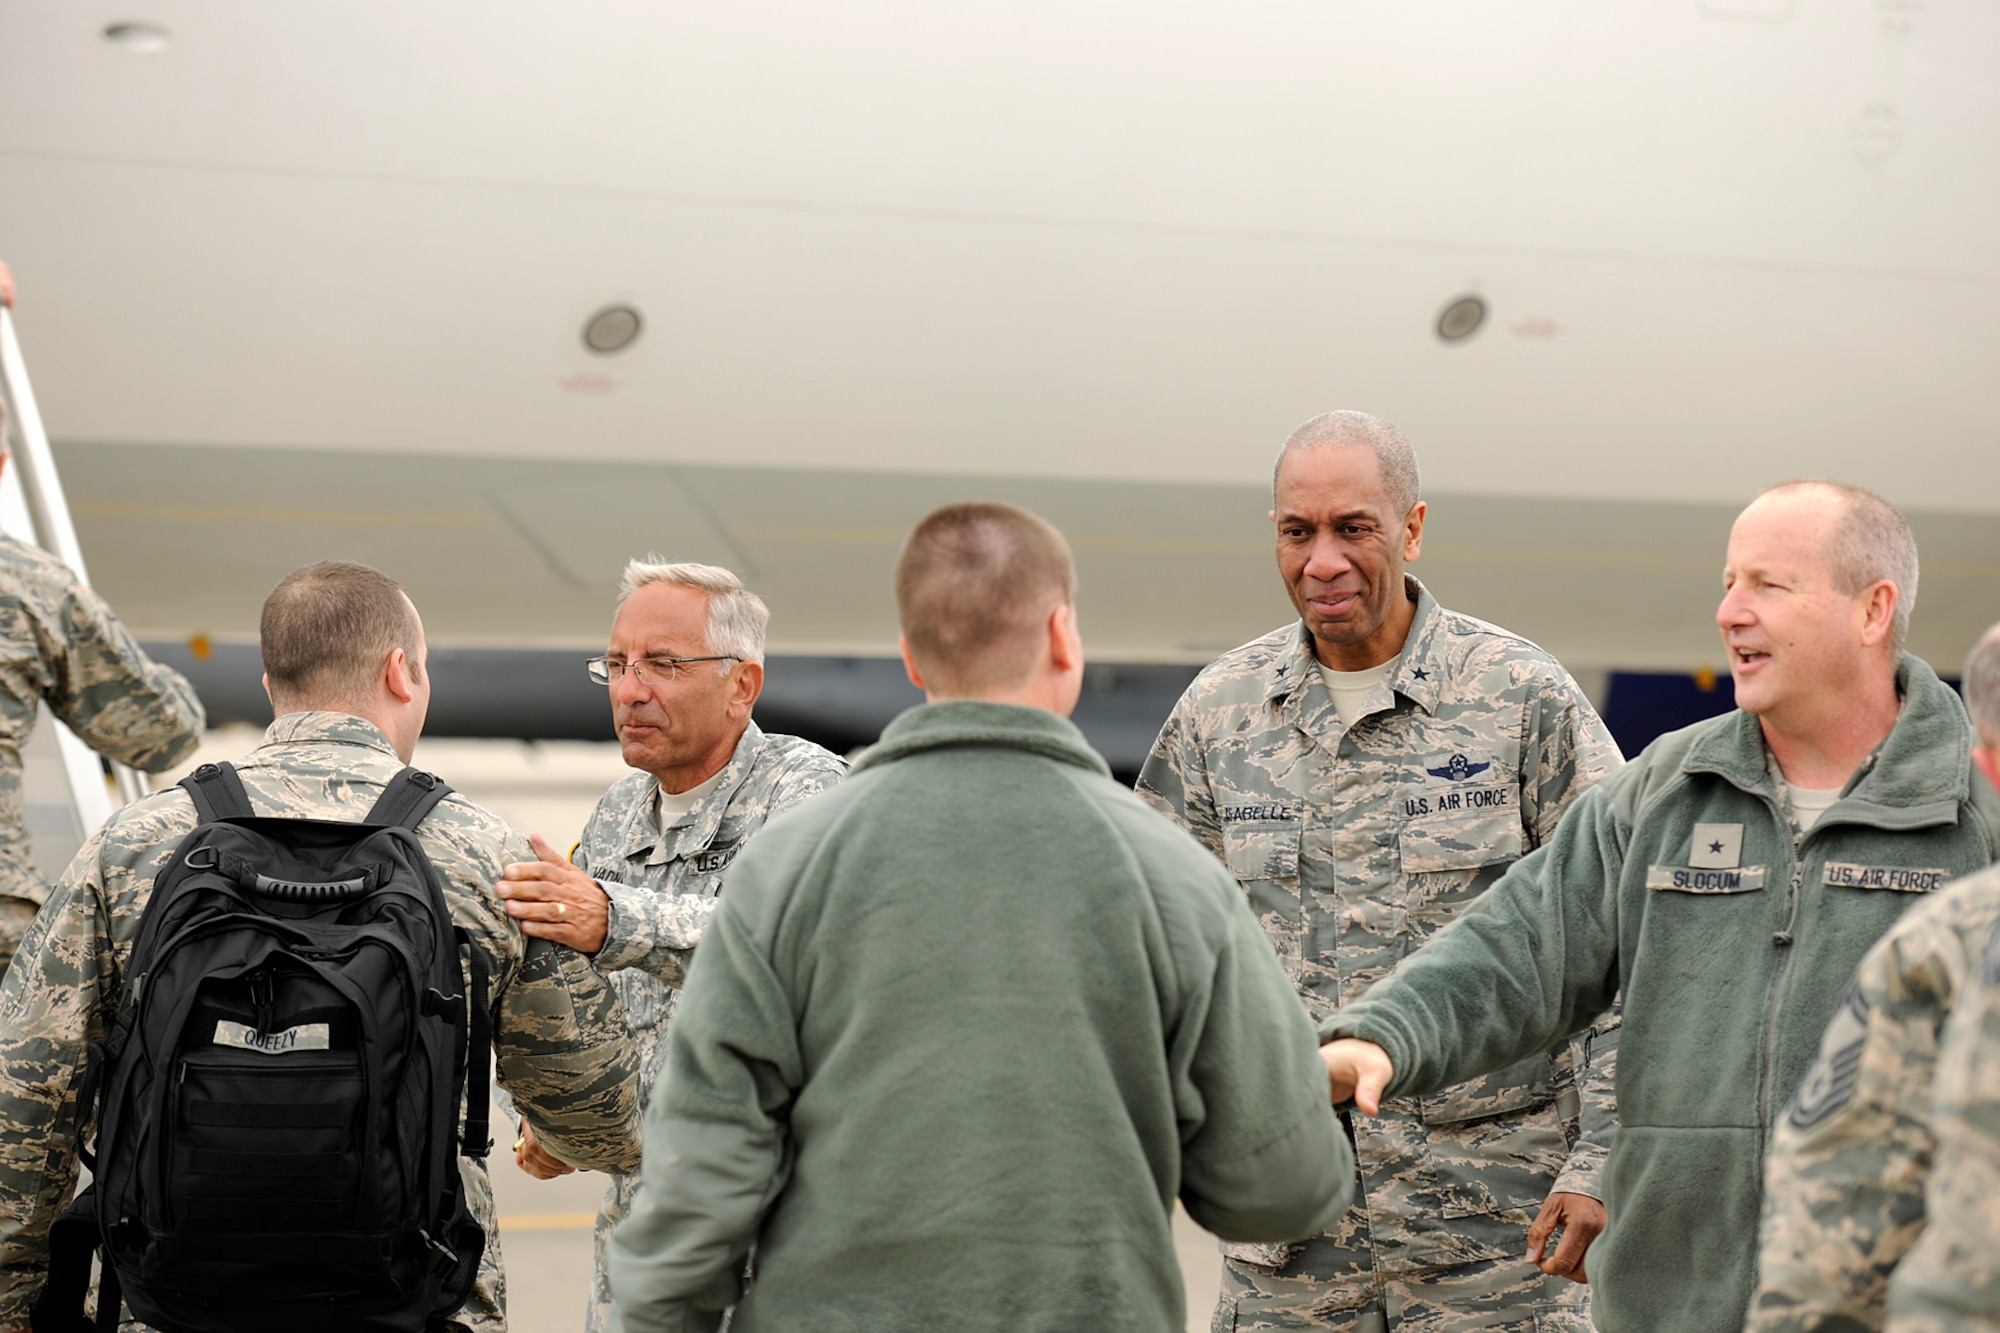 150410-Z-EZ686-007 -- Senior leaders of the Michigan National Guard shake hands with deploying members of the 127th Wing at Selfridge Air National Guard Base, Mich., April 10, 2015. Sending off the Airmen are Major Gen. Gregory J. Vadnais, adjutant general of Michigan; Brig. Gen. Leonard W. Isabelle Jr., commander of the Michigan Air National Guard; and Brig. Gen. John D. Slocum, commander of the 127th Wing. (U.S. Air National Guard photo by Master Sgt. David Kujawa)